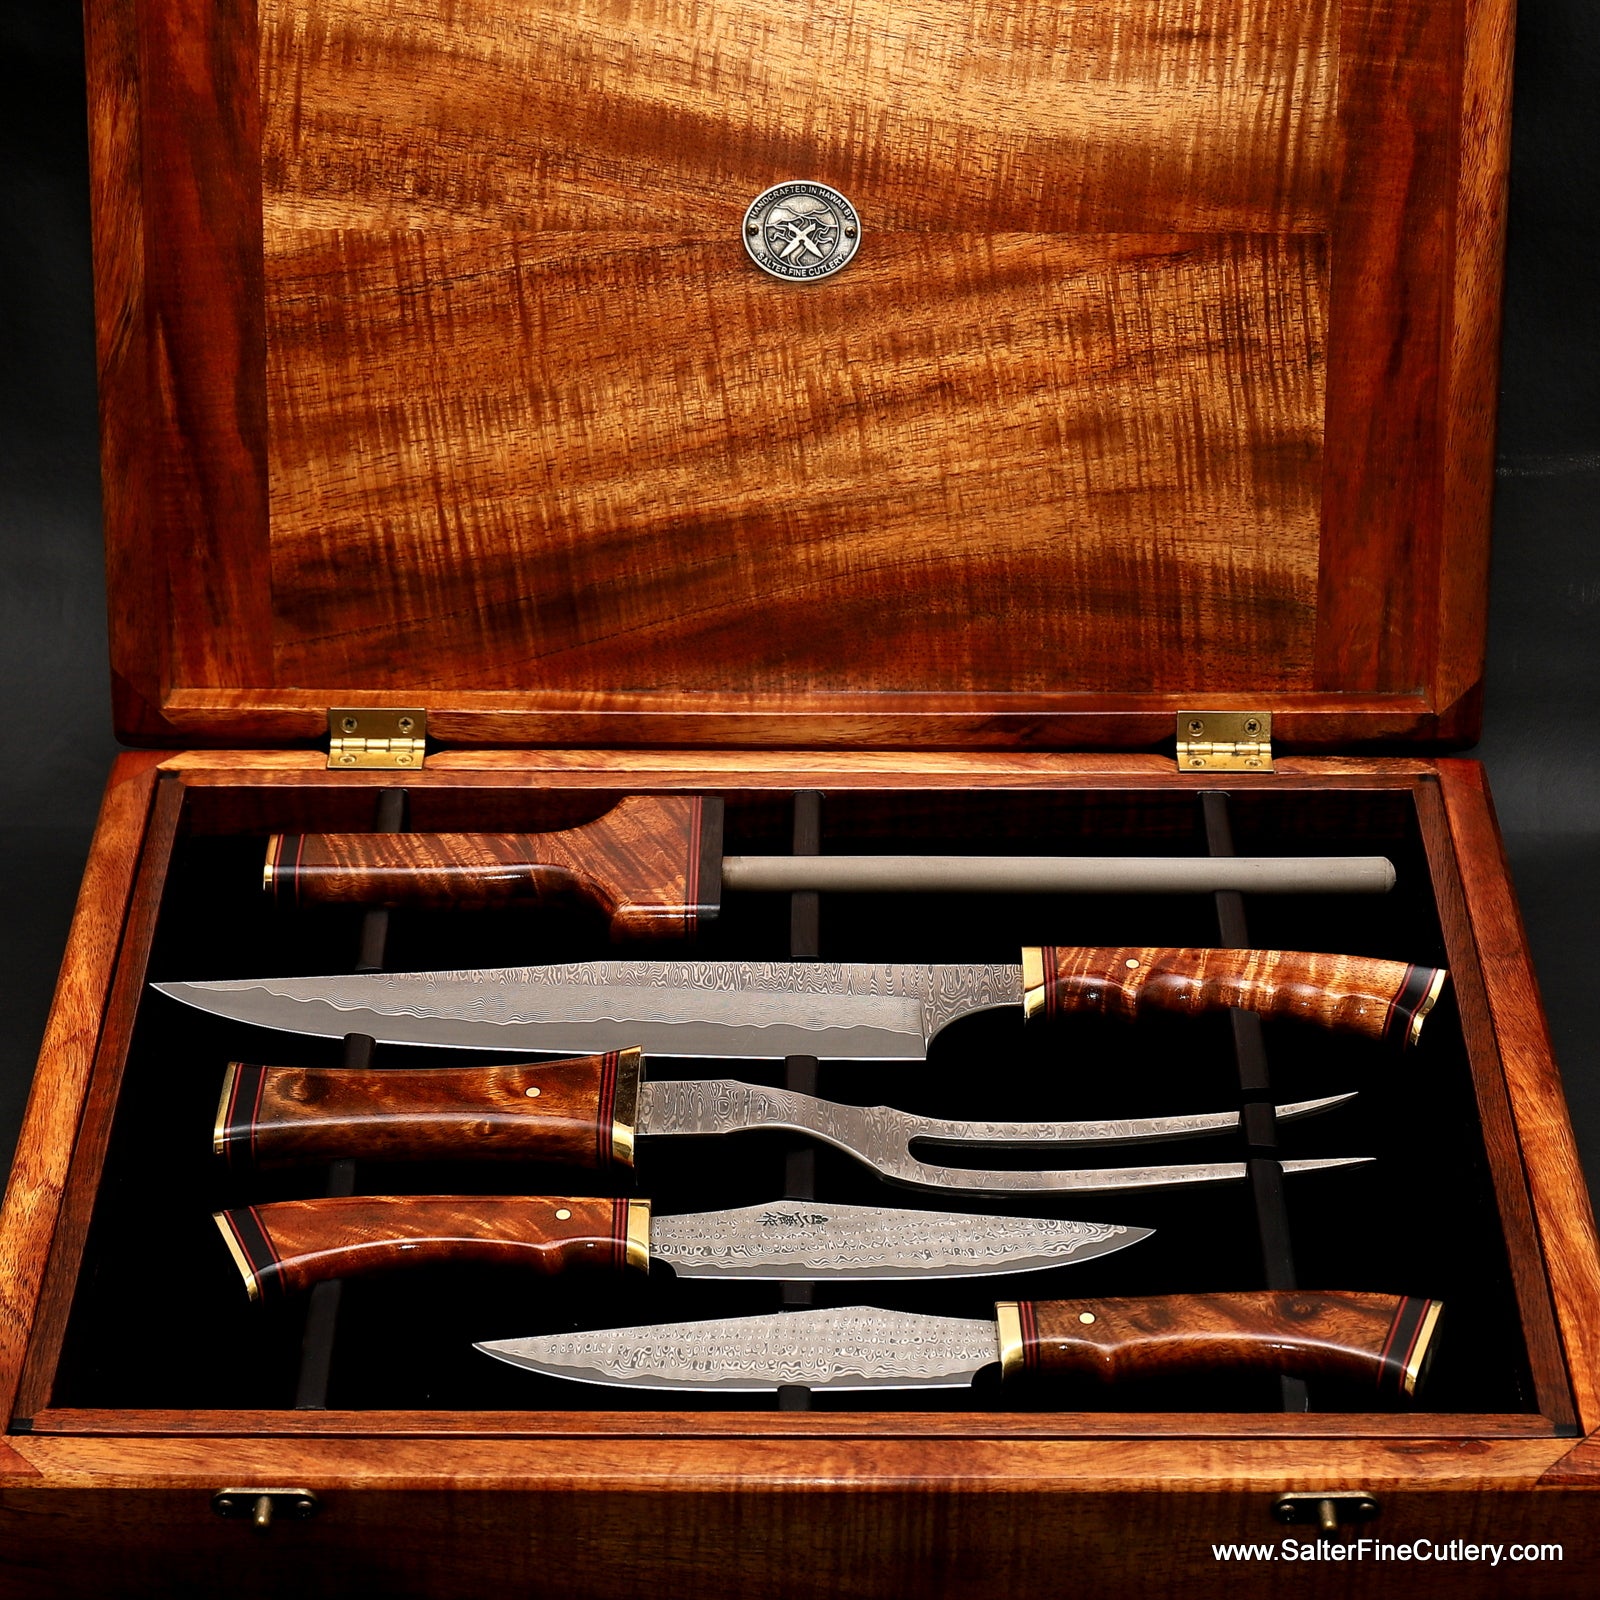 https://cdn.shopify.com/s/files/1/0993/8330/files/5-piece_custom_carving_set_and_personal_steak_knife_set_from_Salter_Fine_Cutlery.jpg?v=1603586839